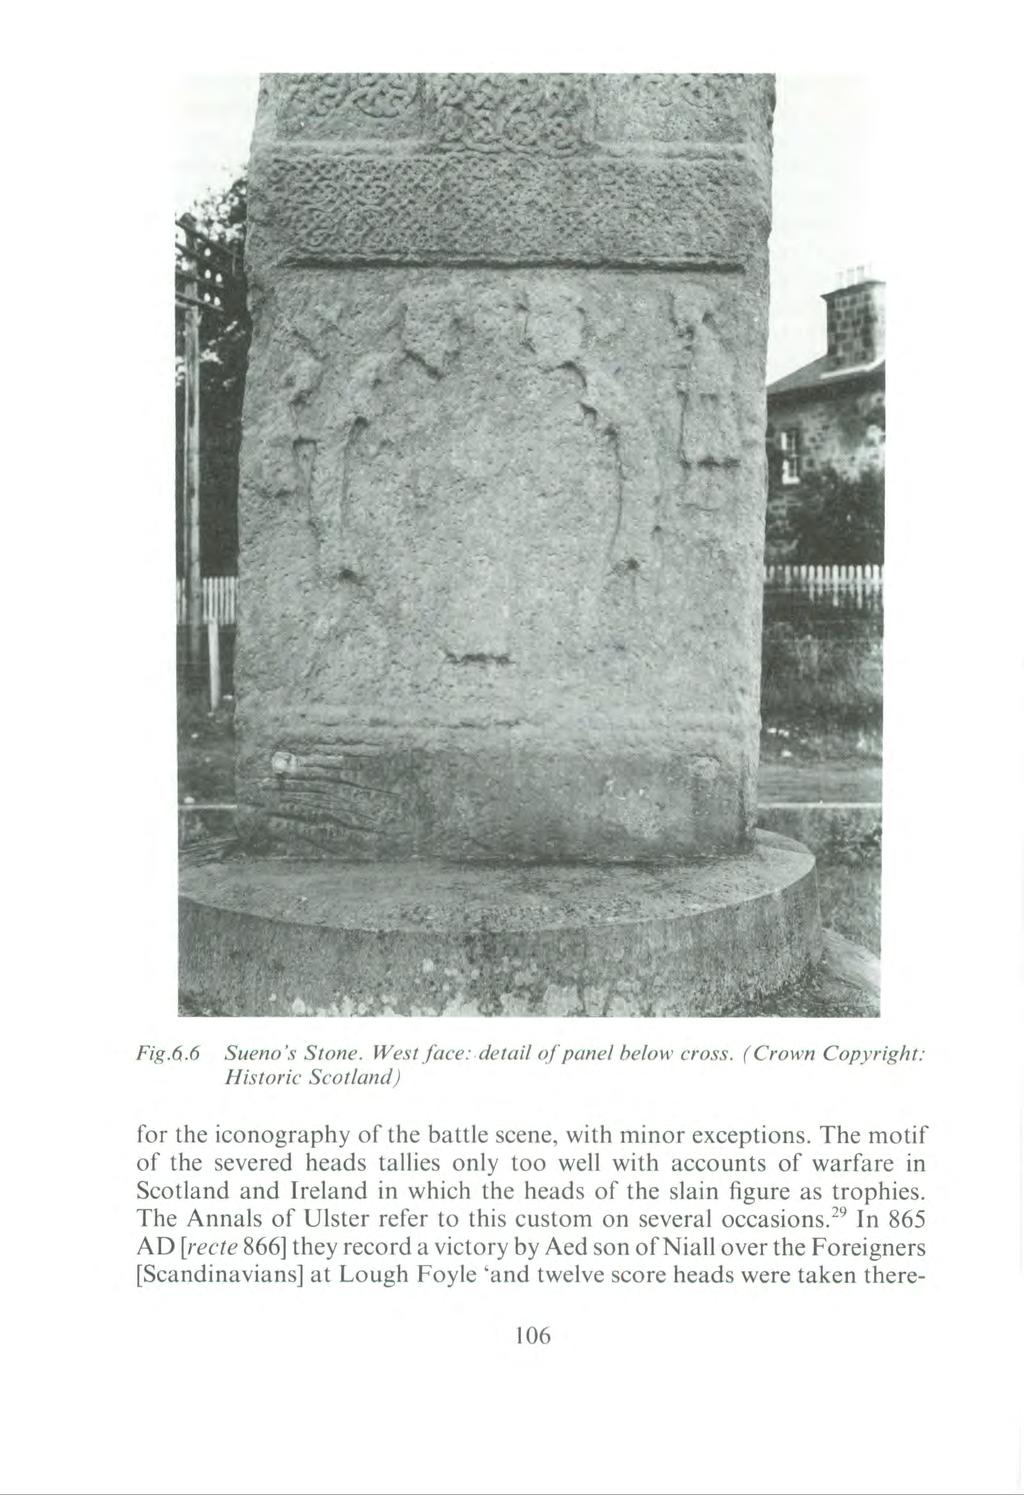 Fig.6.6 Sueno's Stone. West face: detail of panel below cross. ( Crown Copyright: Historic Scotland) for the iconography of the battle scene, with minor exceptions.